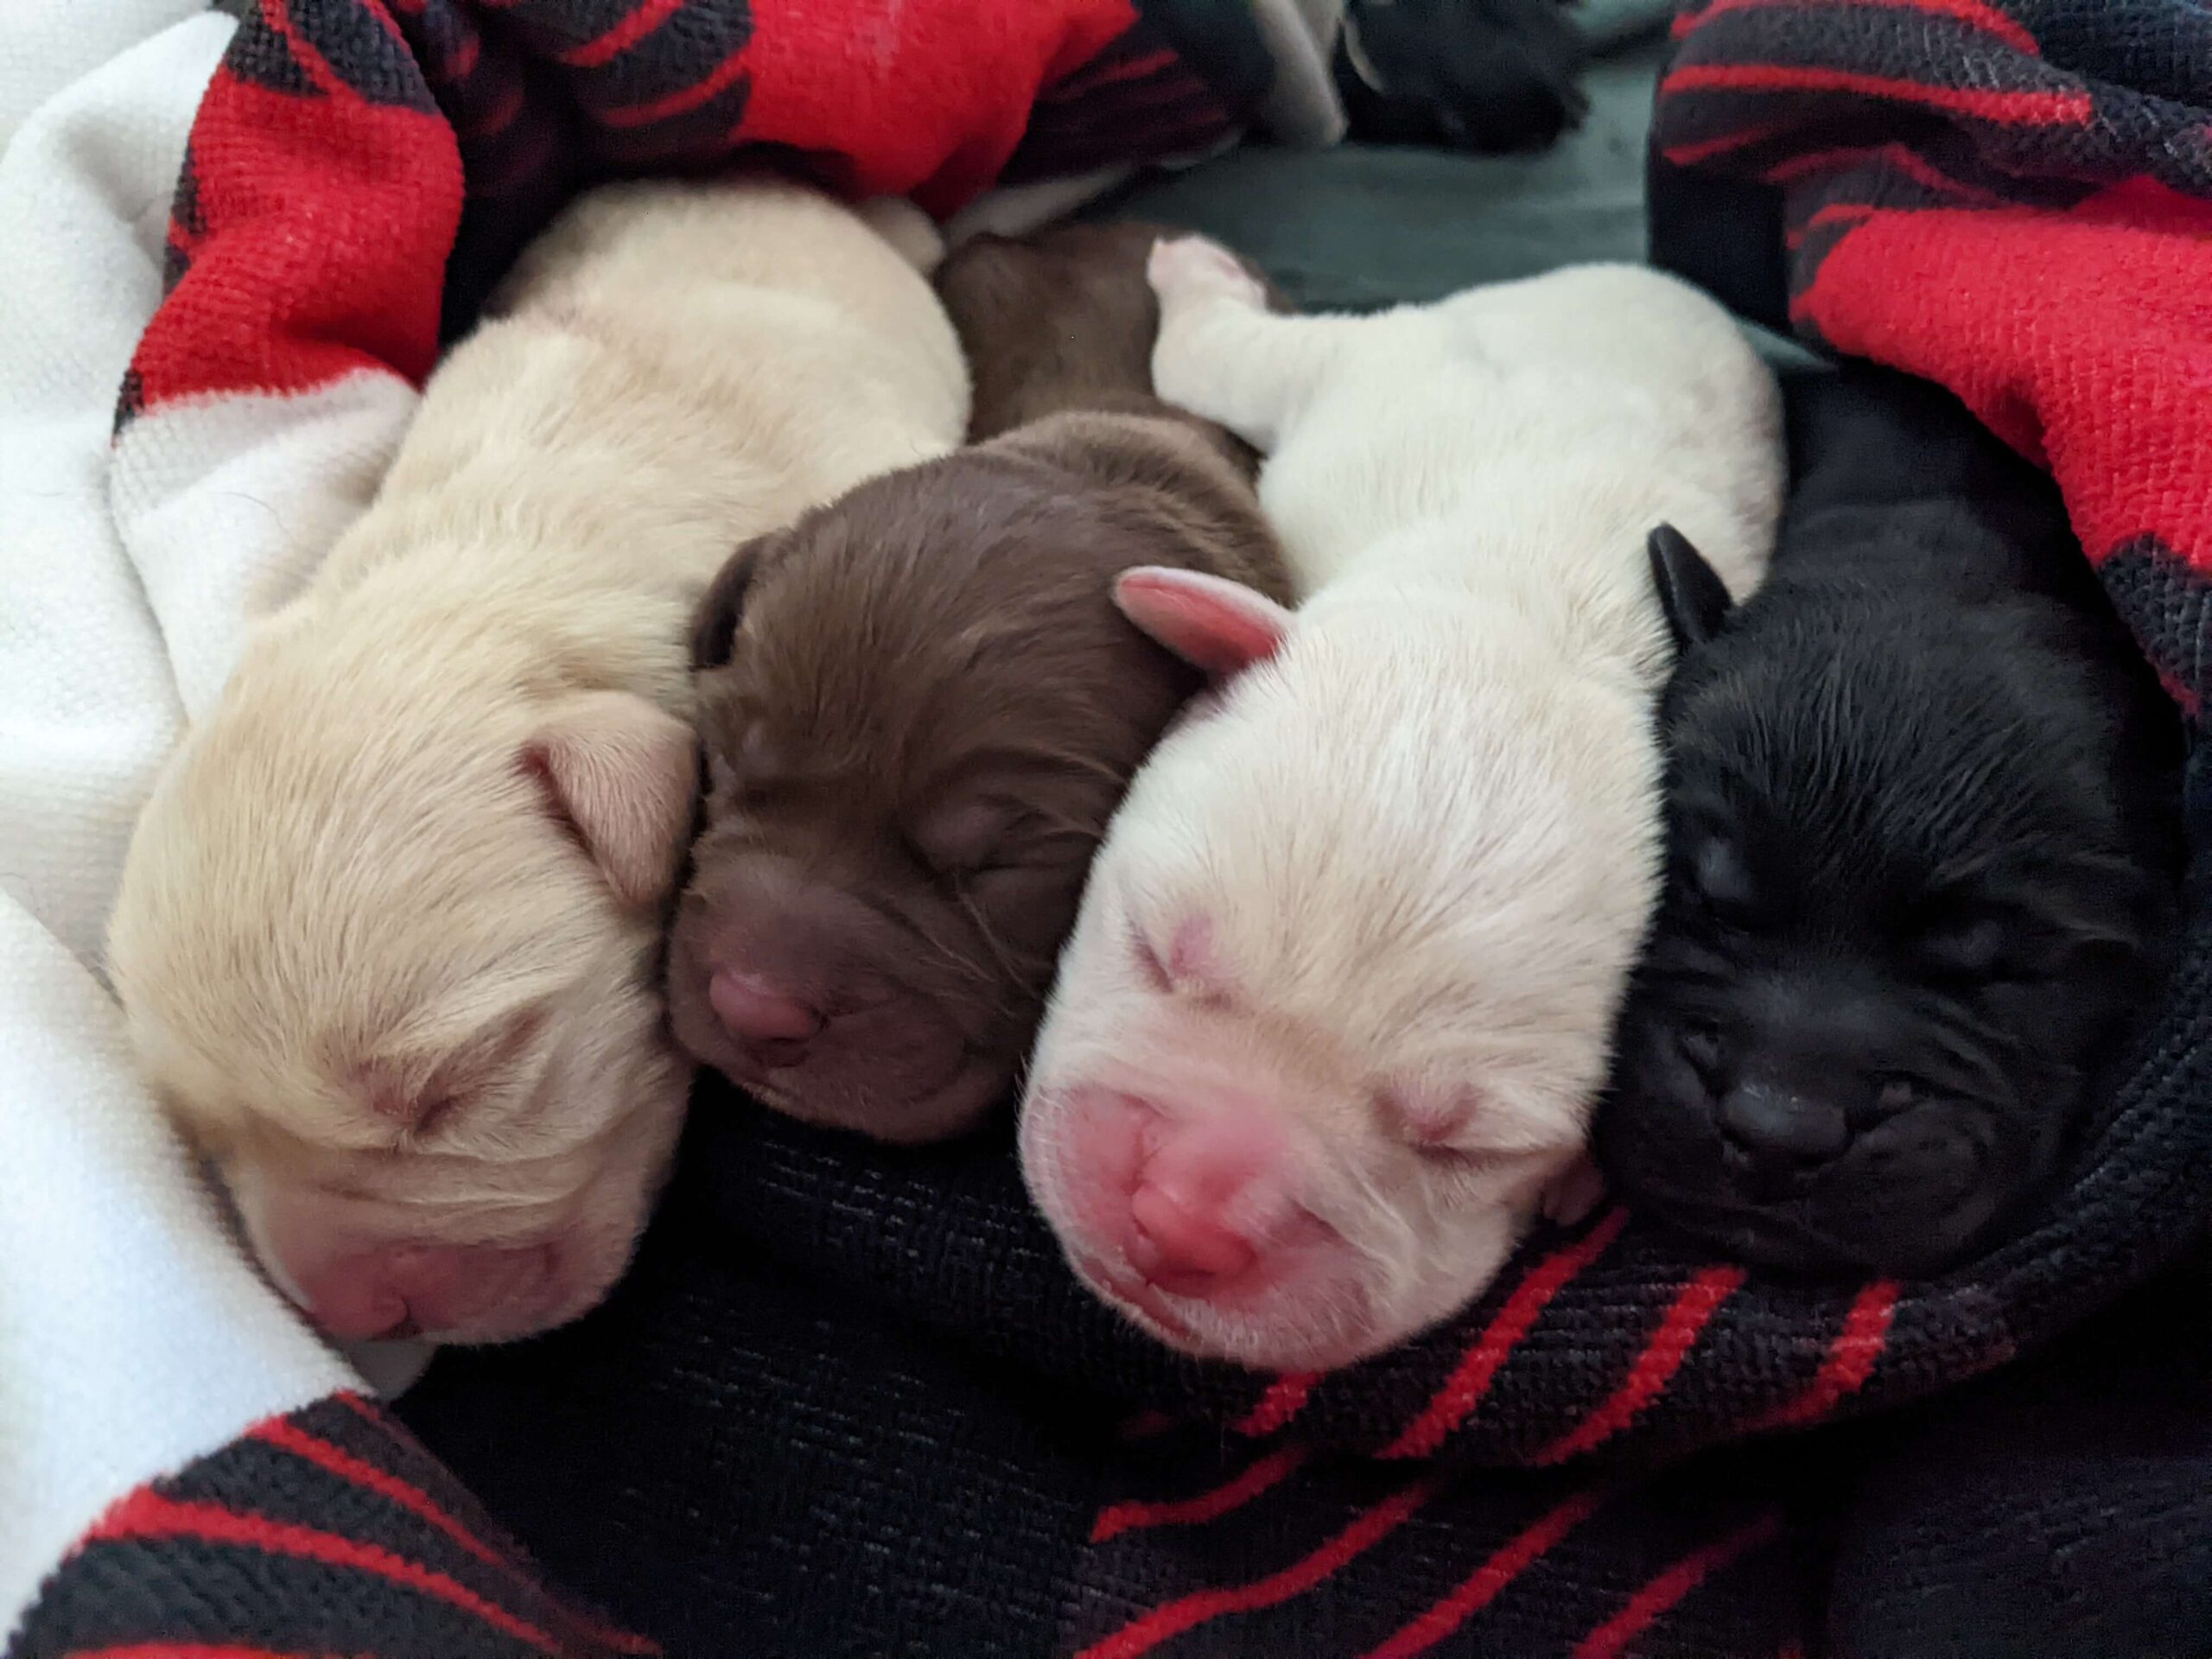 Day-old labrador puppies laying on a blanket.